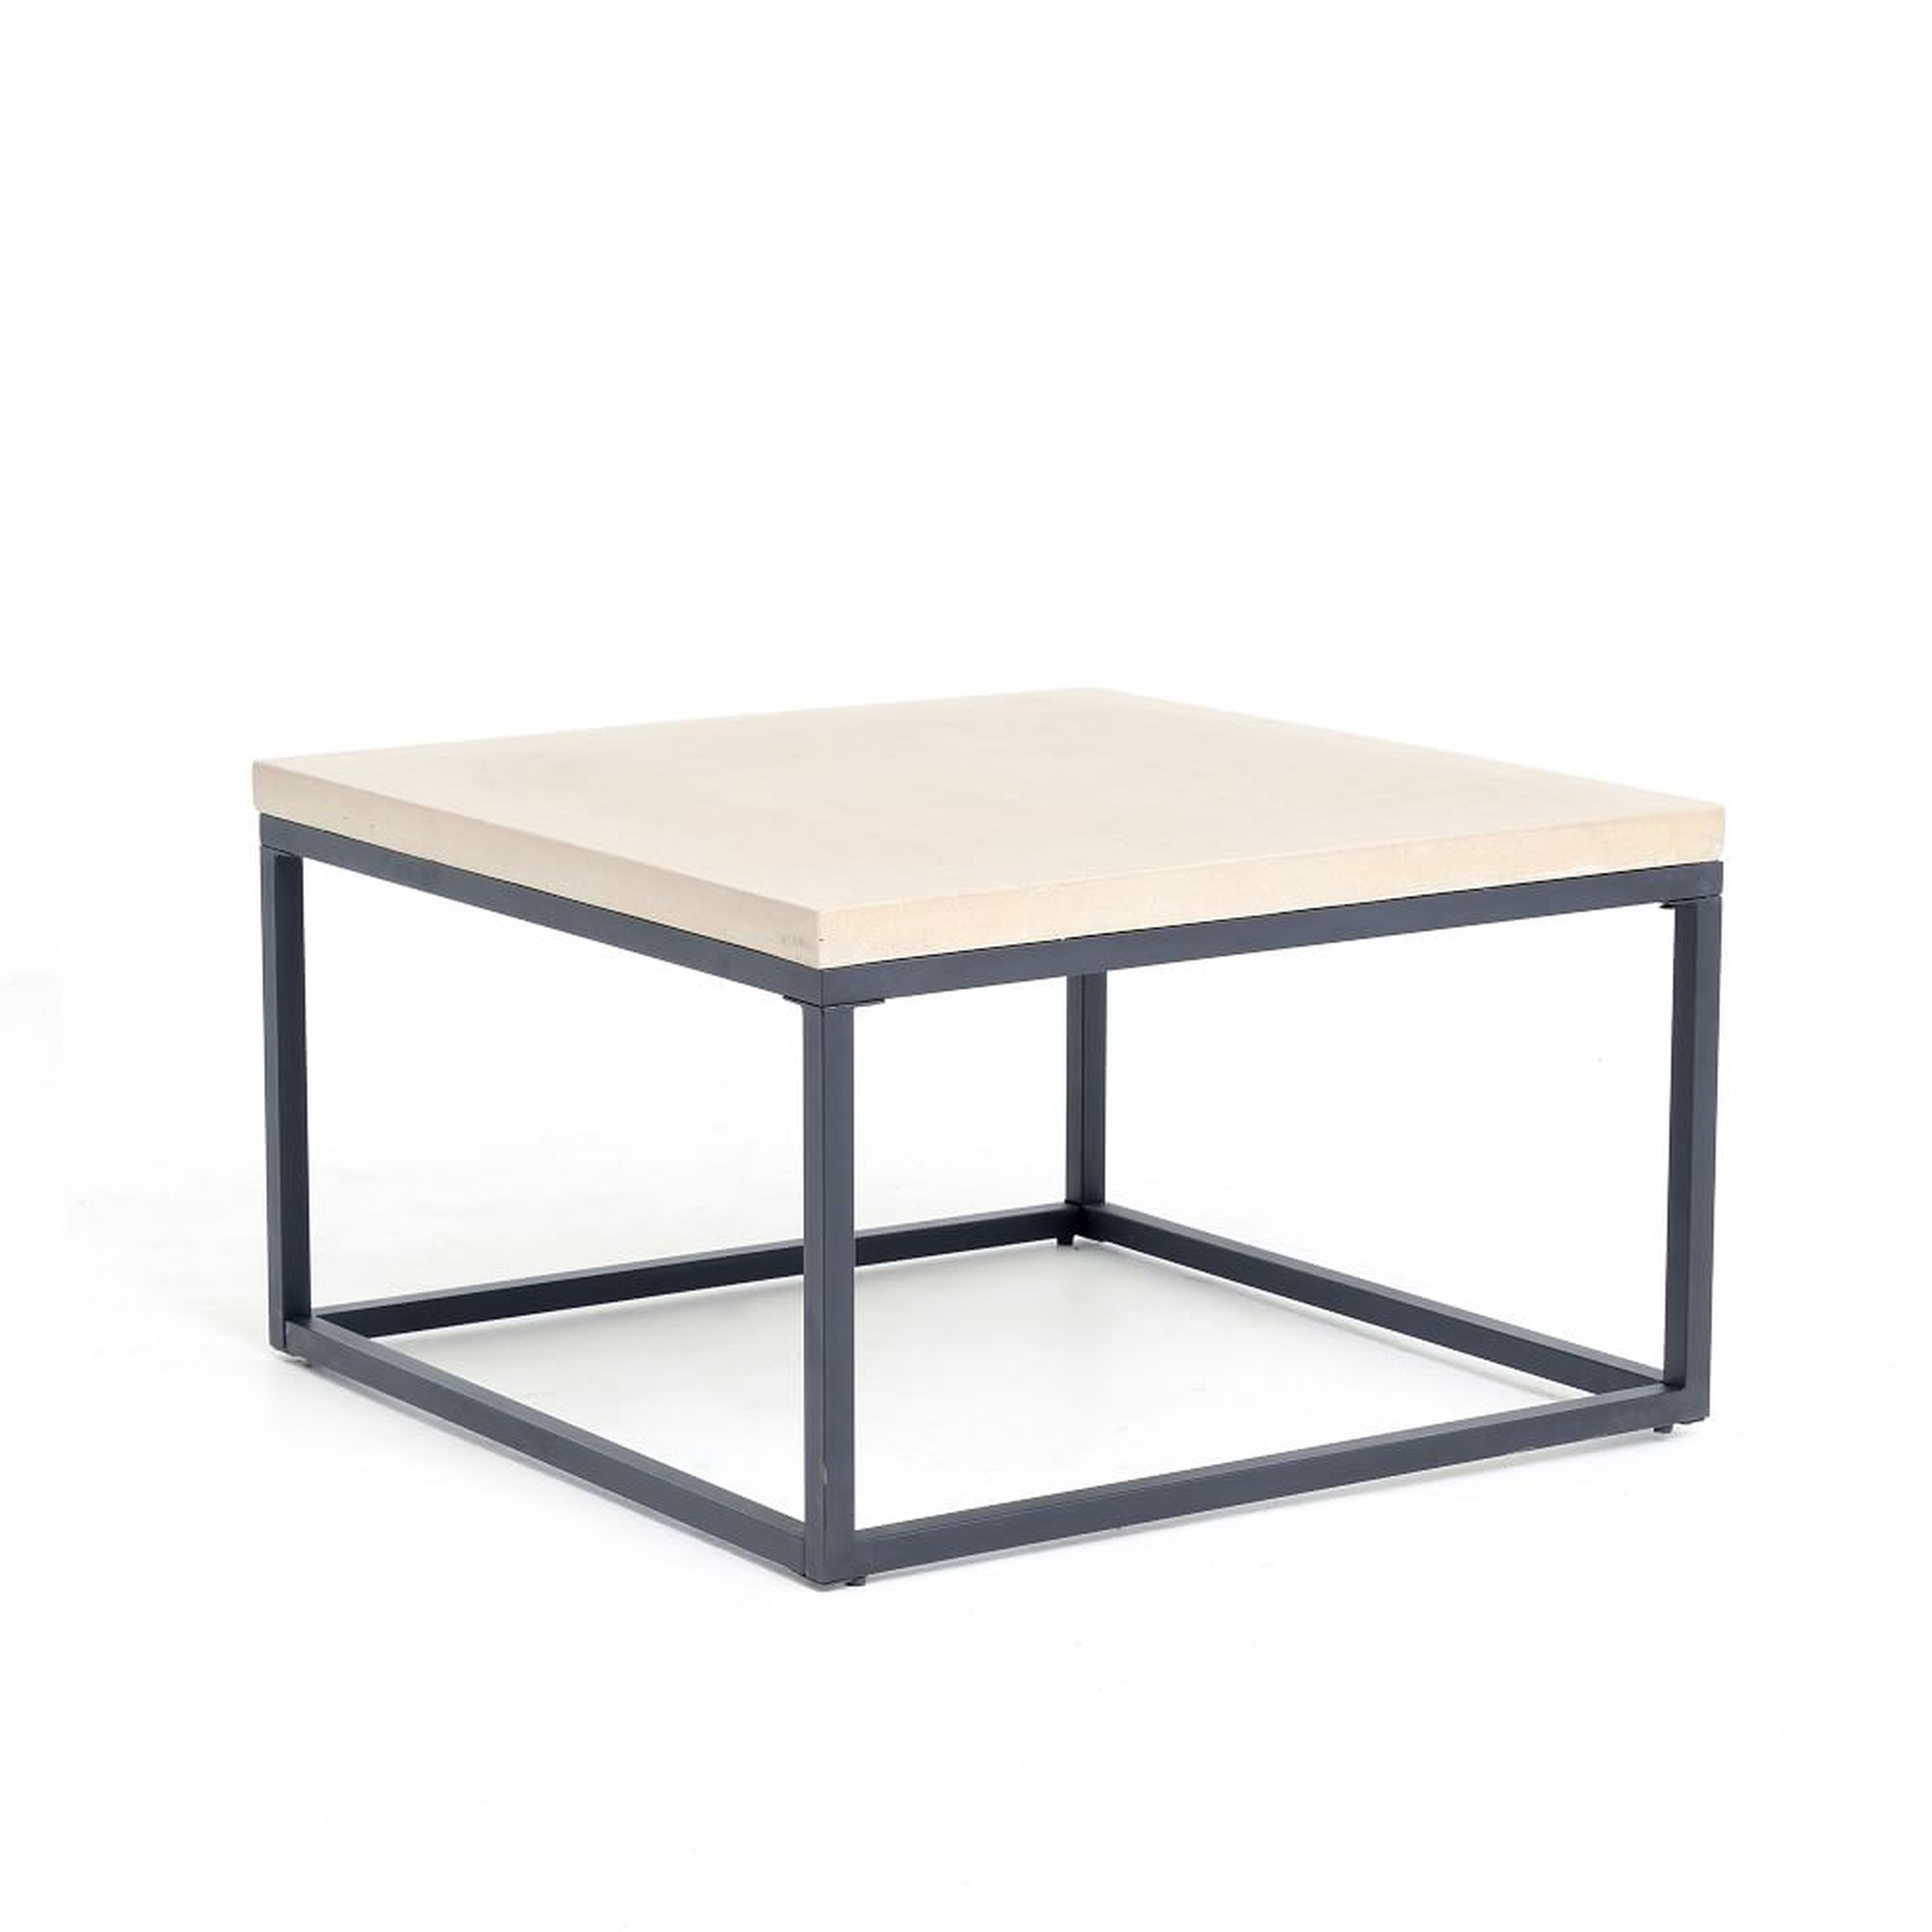 Malfa 29.5" Square Coffee Table, Natural - West Elm